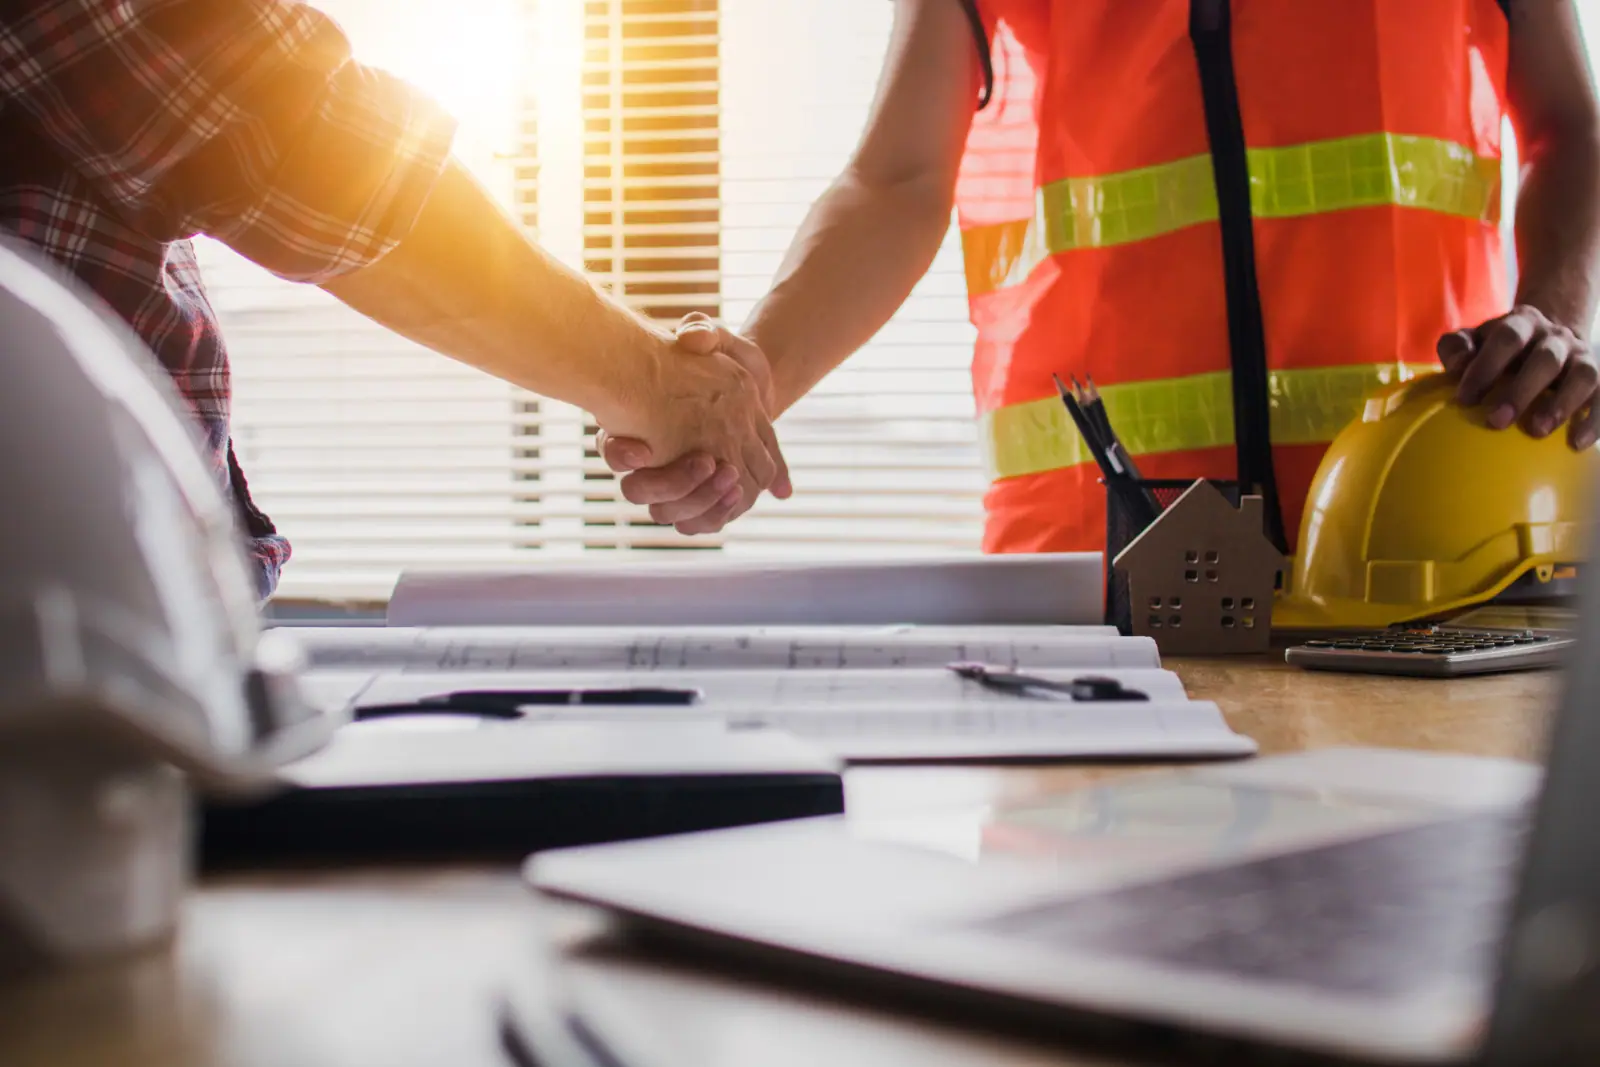 JazzHR Partners with BOLT to Simplify Construction Management